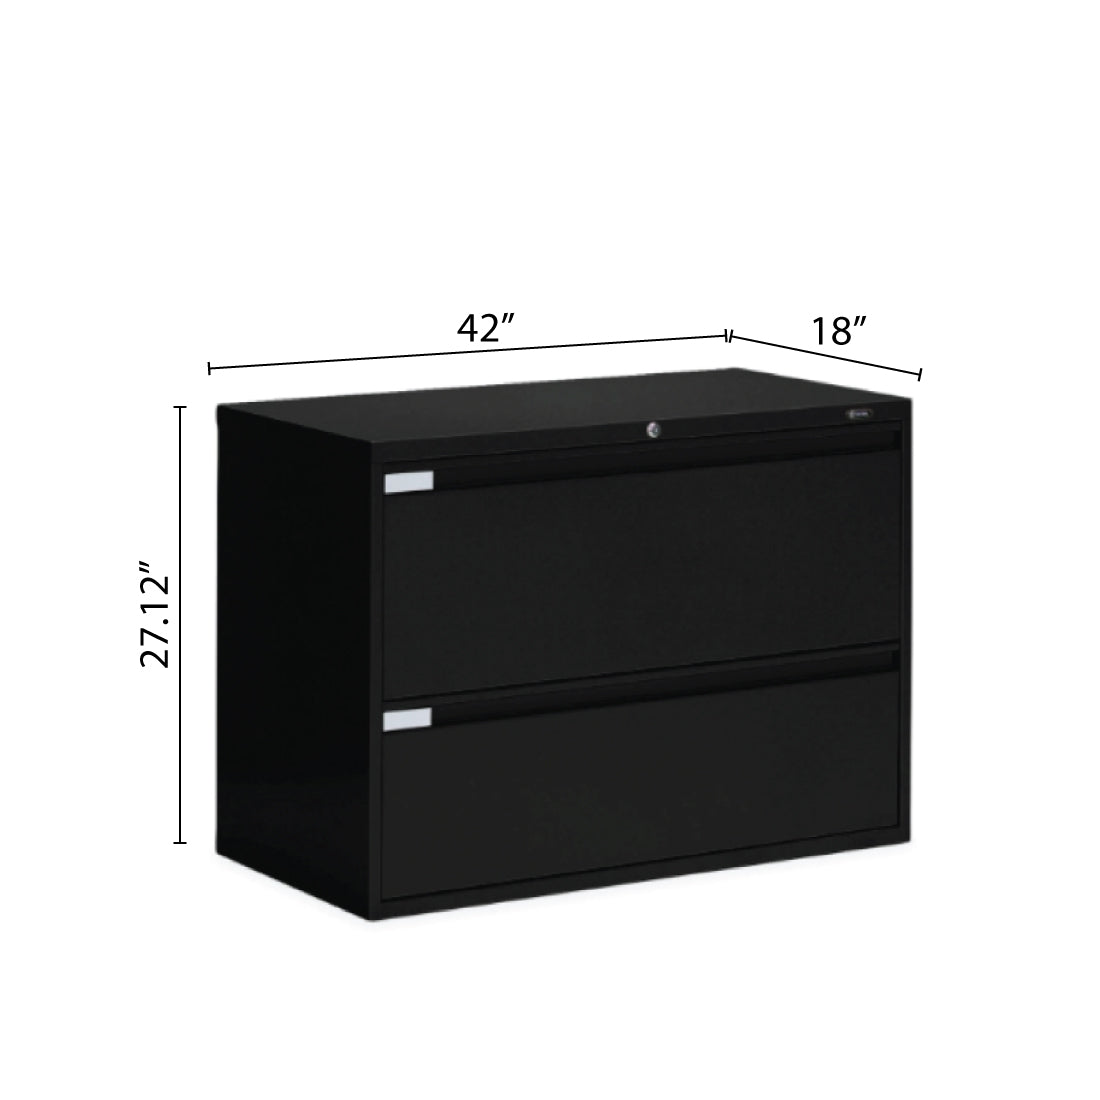 2 Drawer Lateral File (42"W) - Kainosbuy.com